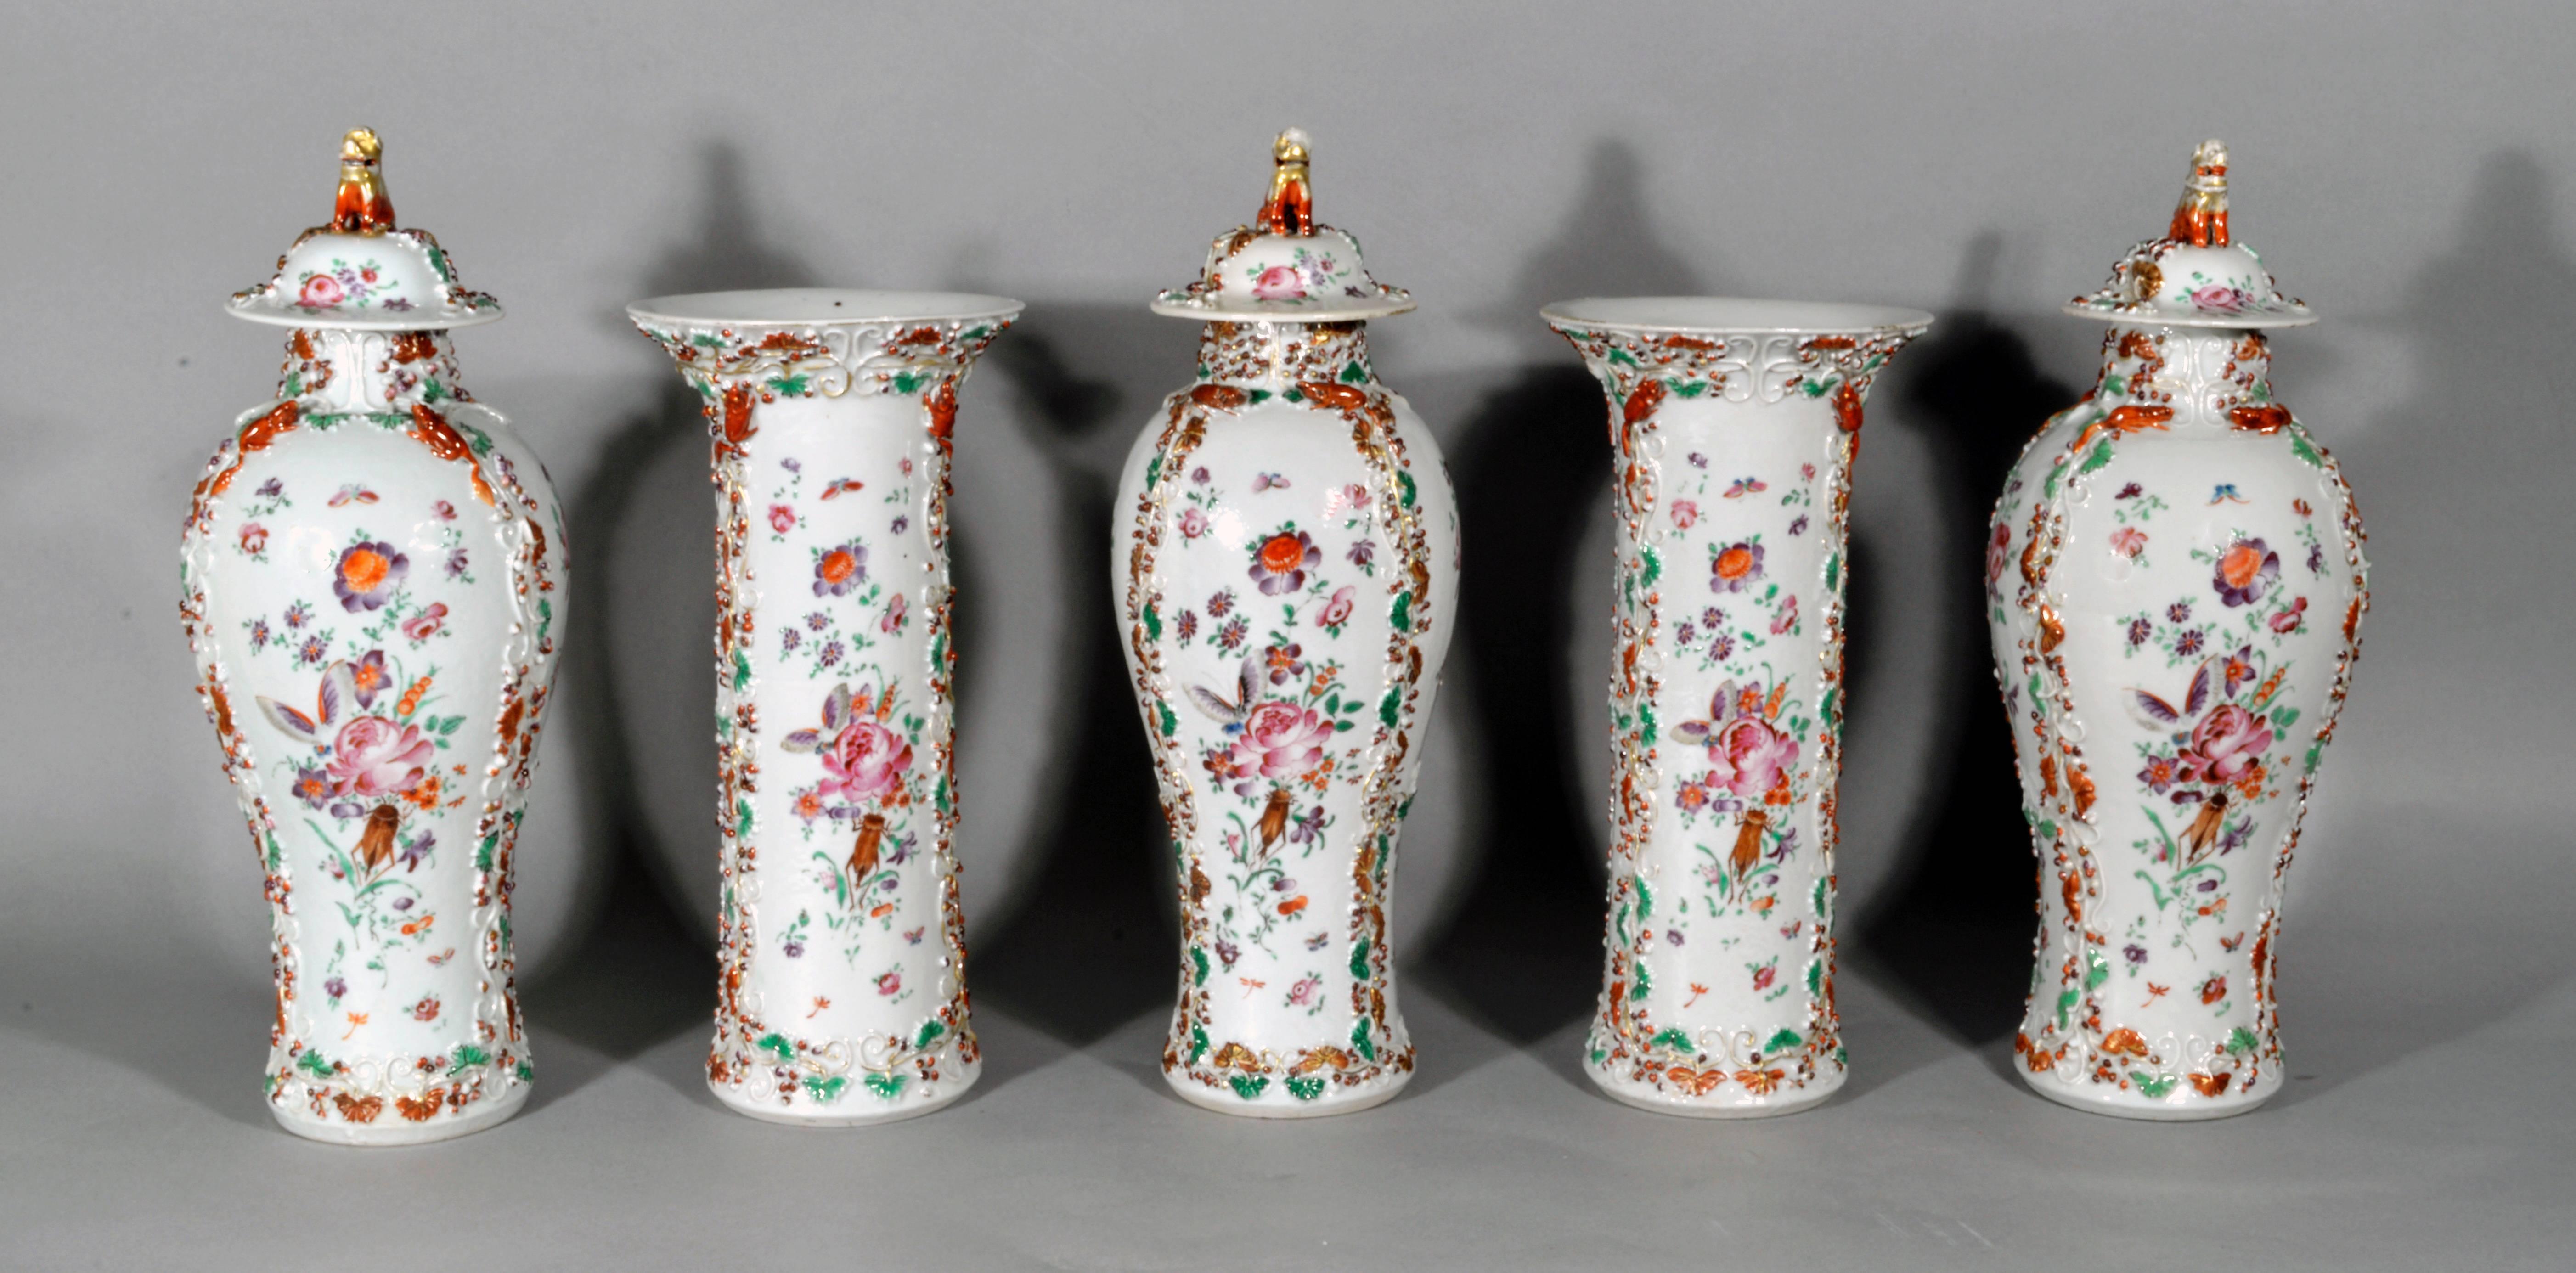 The Chinese porcelain famille rose porcelain garniture is decorated with European flowers, crickets and moths and comprises of five vases, three baluster vases with covers and two of cylindrical trumpet vases with flaring rims, each modeled in low